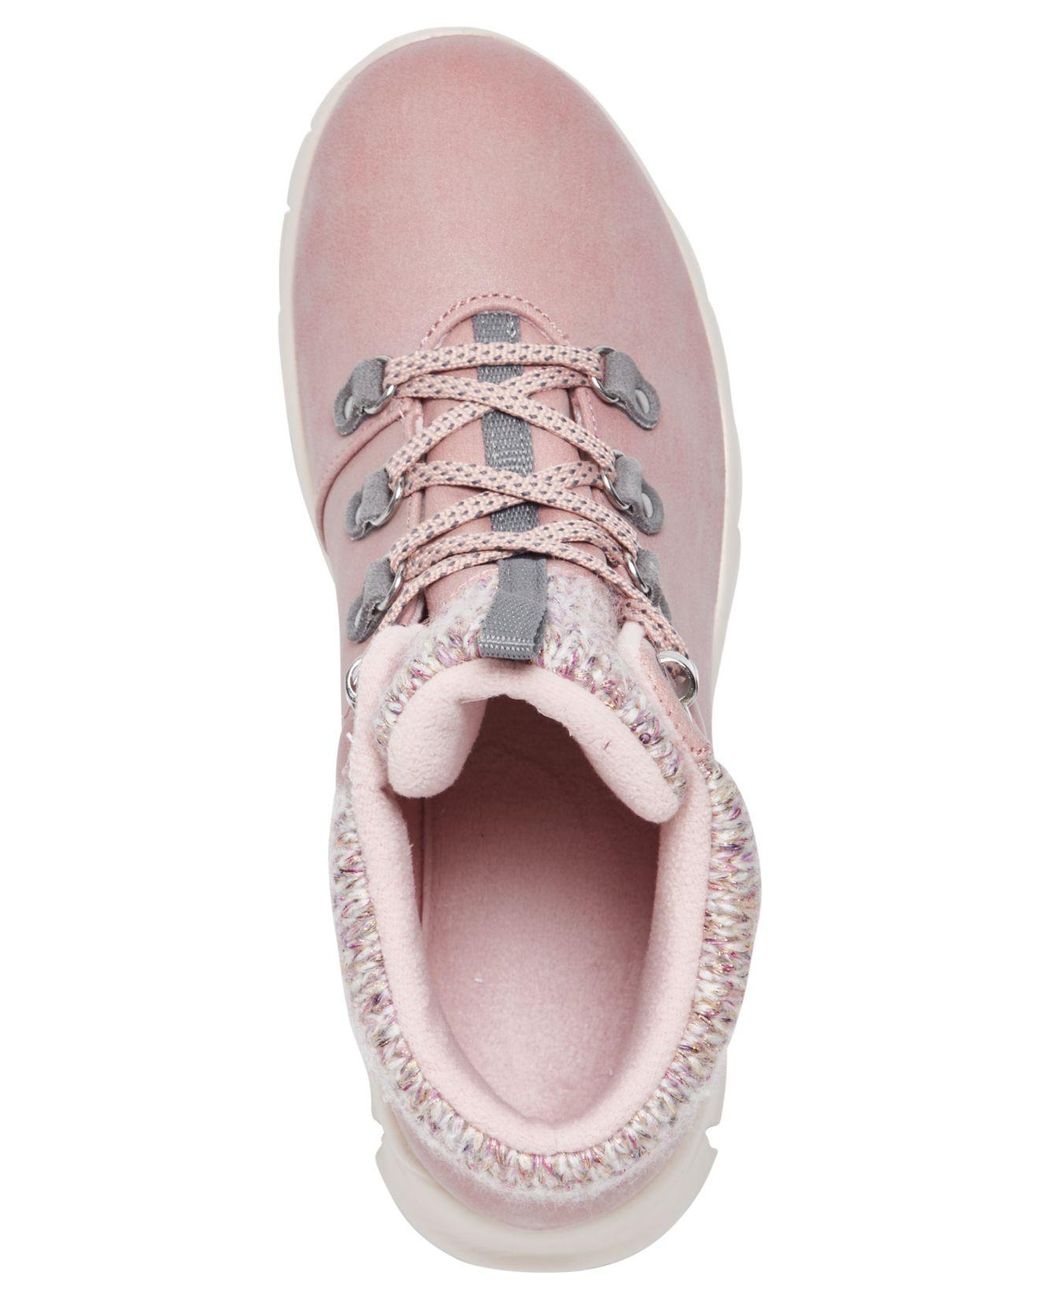 Skechers Synergy - Pretty Hiker Hiking Boots From Finish Line in Pink | Lyst